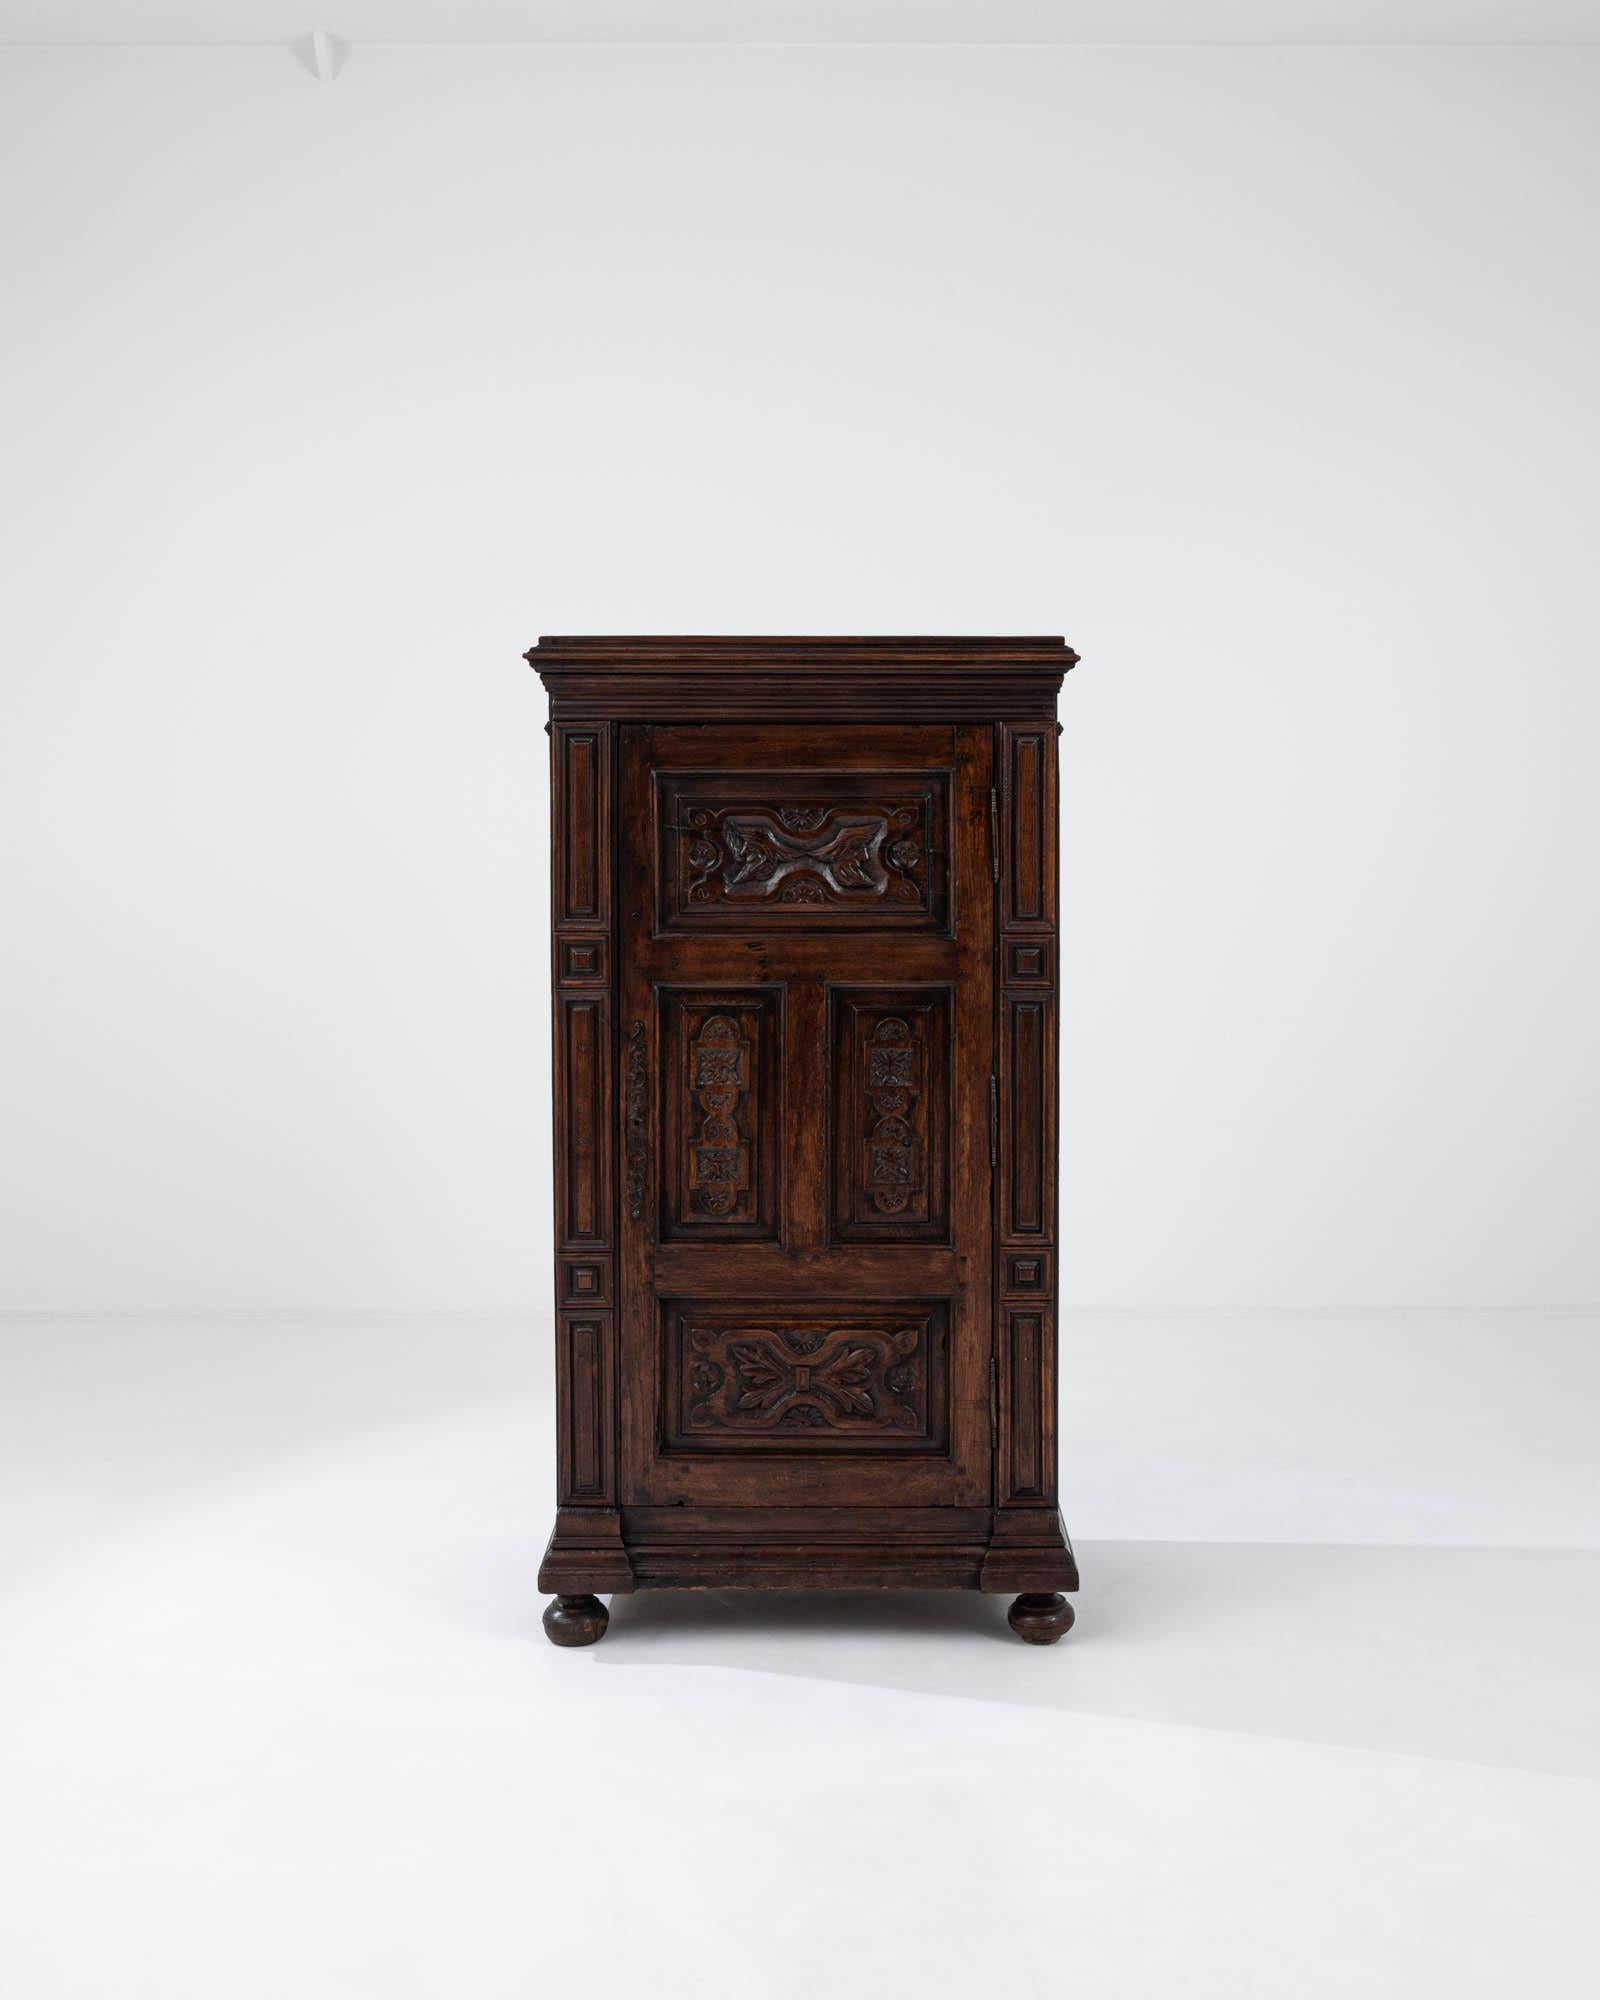 This 19th Century French Wooden Cabinet is a masterpiece of classic design, boasting the original patina that whispers tales of the past. The deep, lustrous tones of the wood are accented by intricate carvings that adorn each panel, featuring motifs